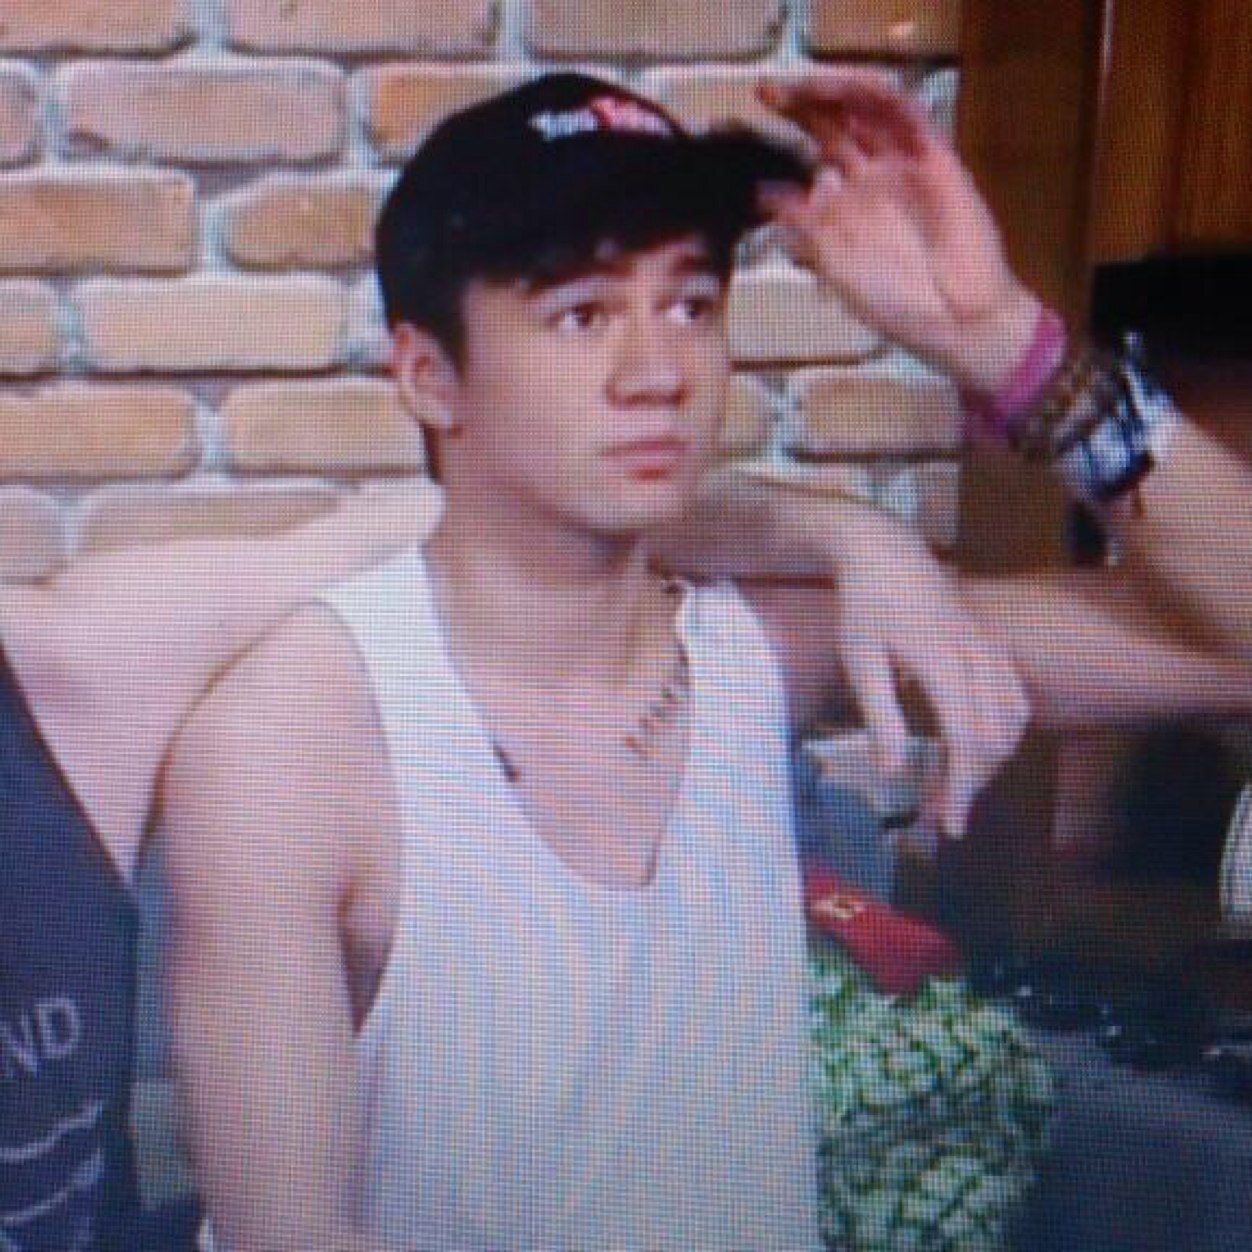 Official Calum Hood from YouTube.